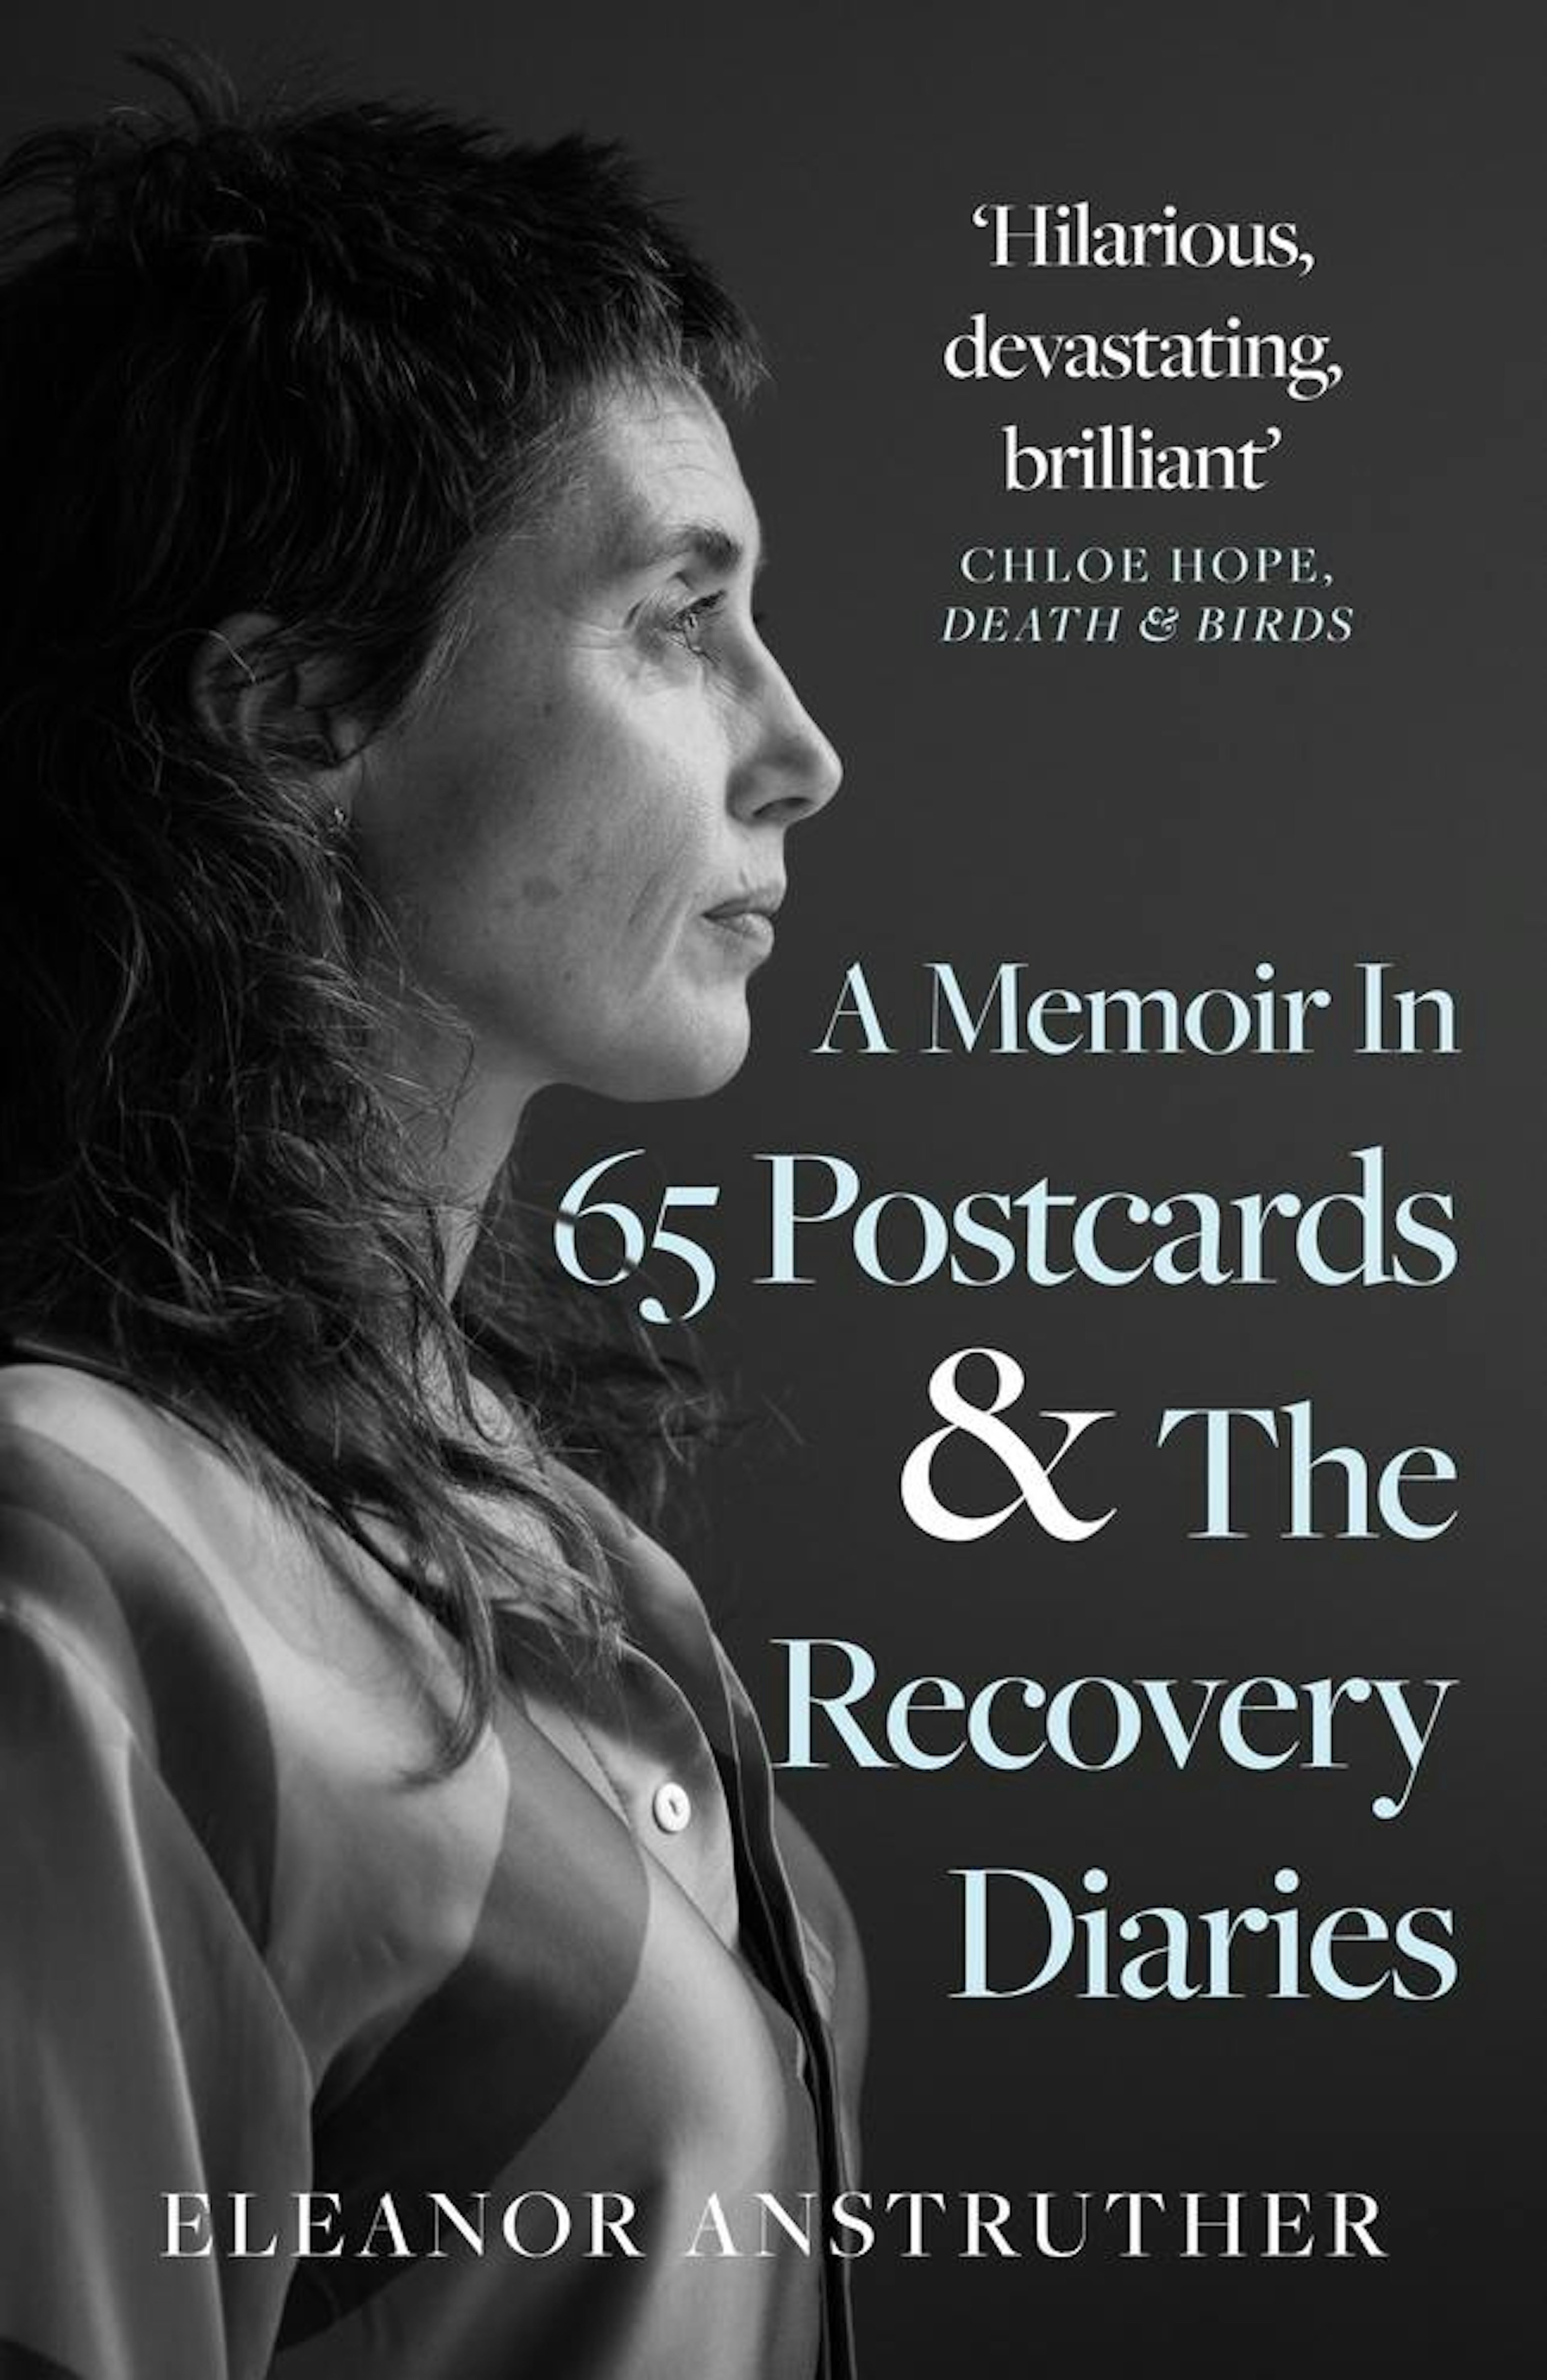 A Memoir In 65 Postcards & The Recovery Diaries